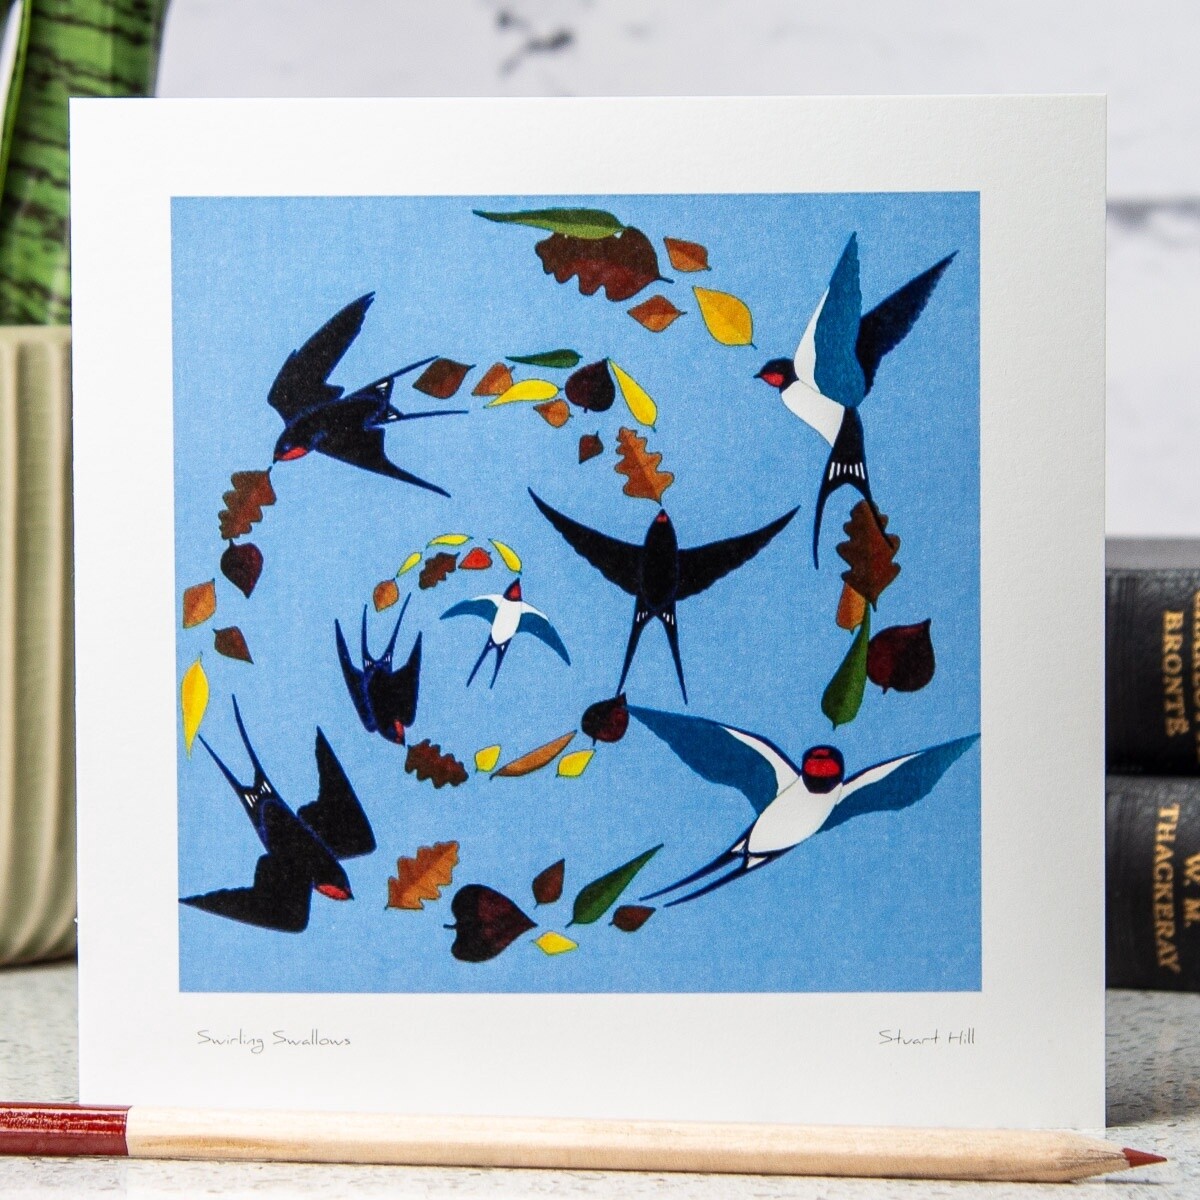 Swirling Swallows Card by Stuart Hill